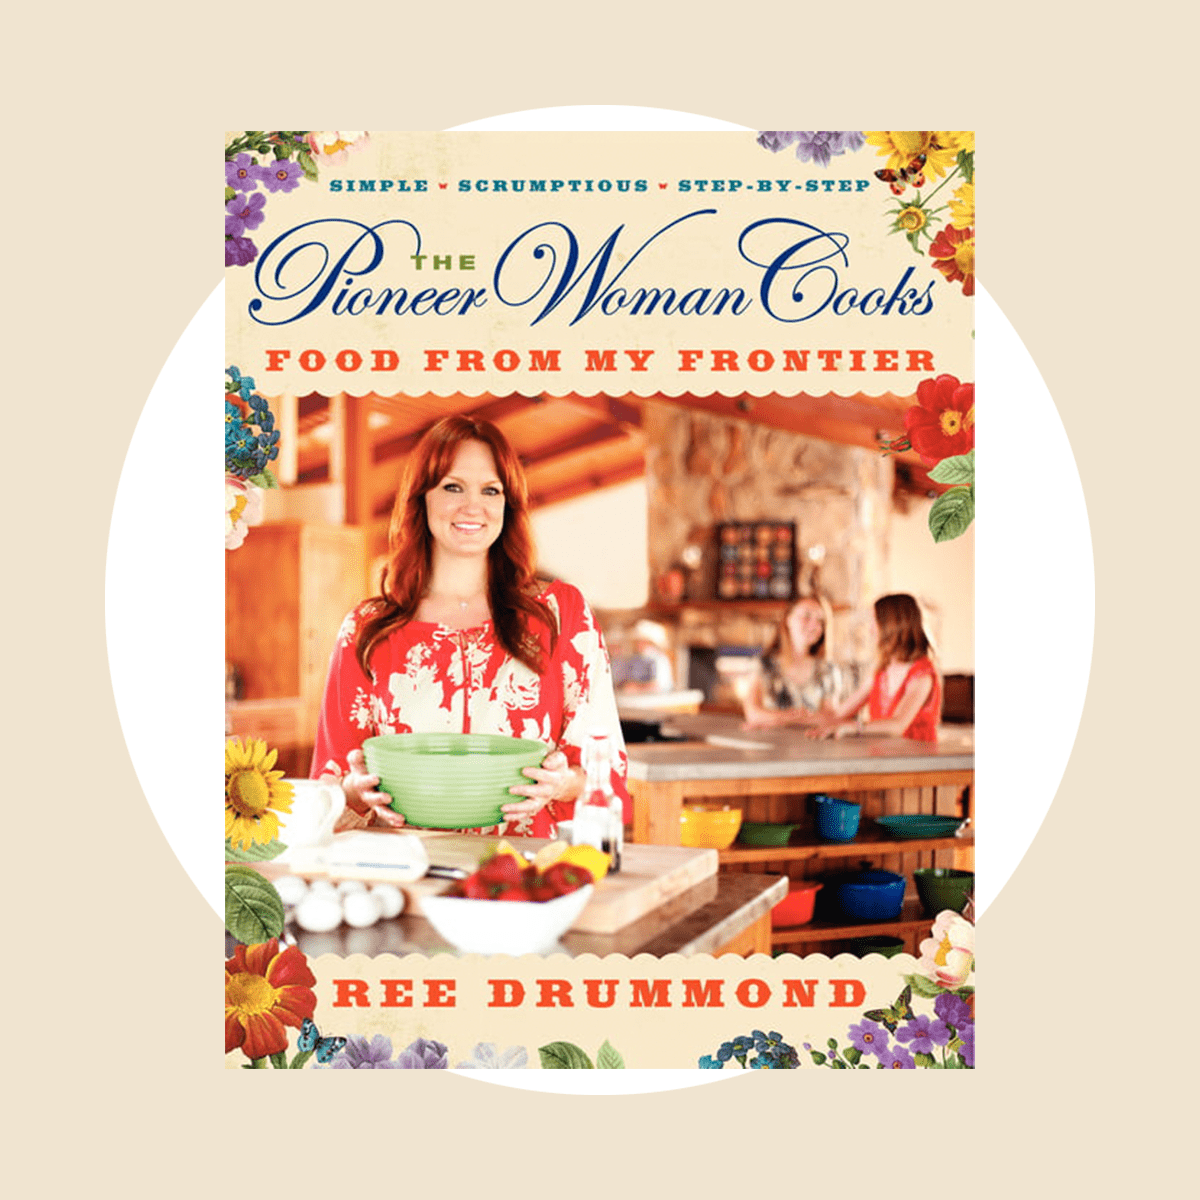 Pioneer Woman Kitchen Products for sale in San Antonio, Texas